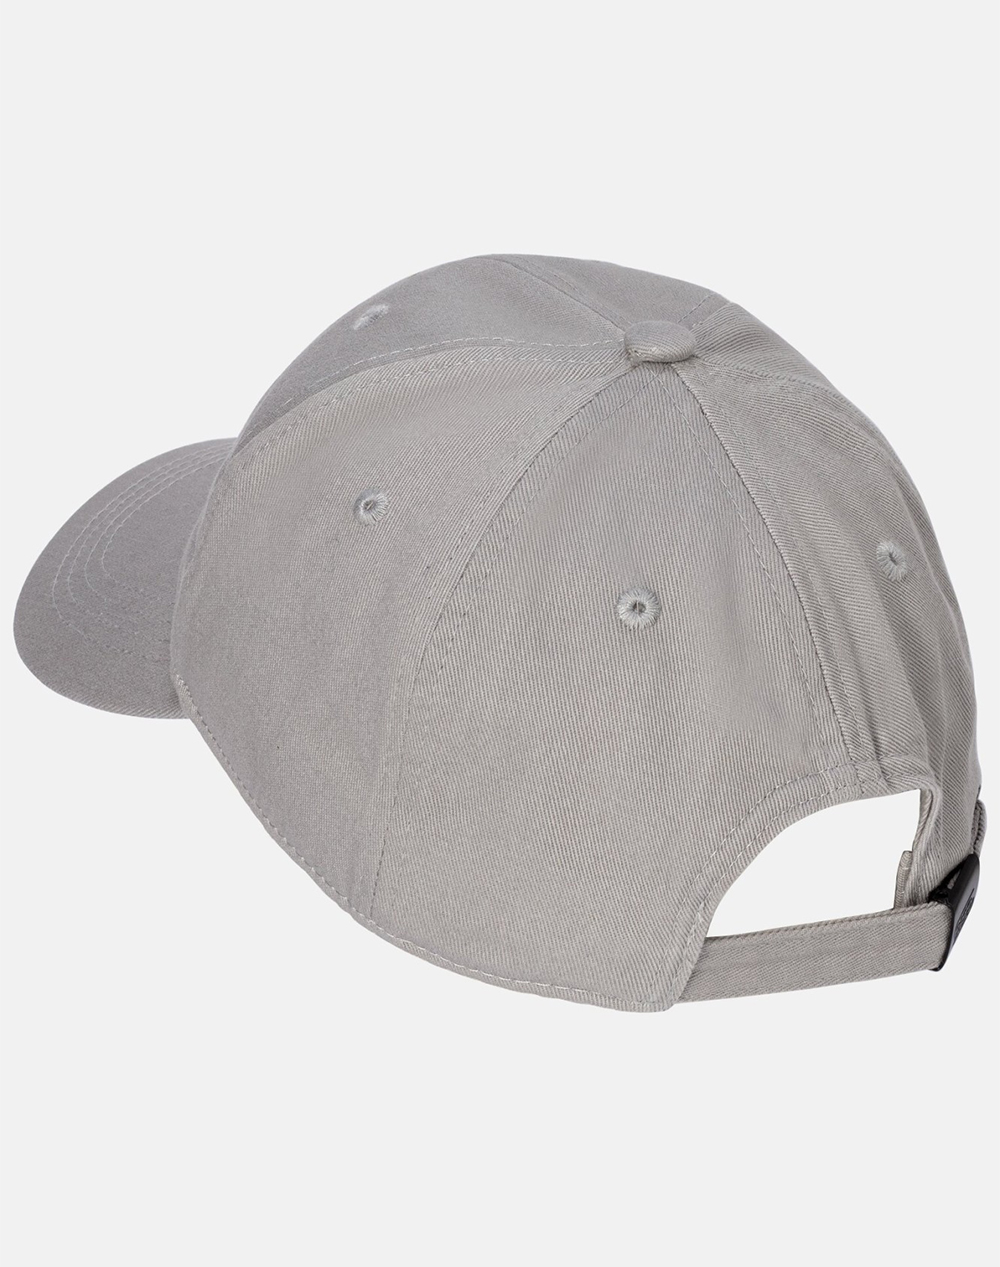 CAMEL ACTIVE ΚΑΠΕΛΟ NOS 6panel